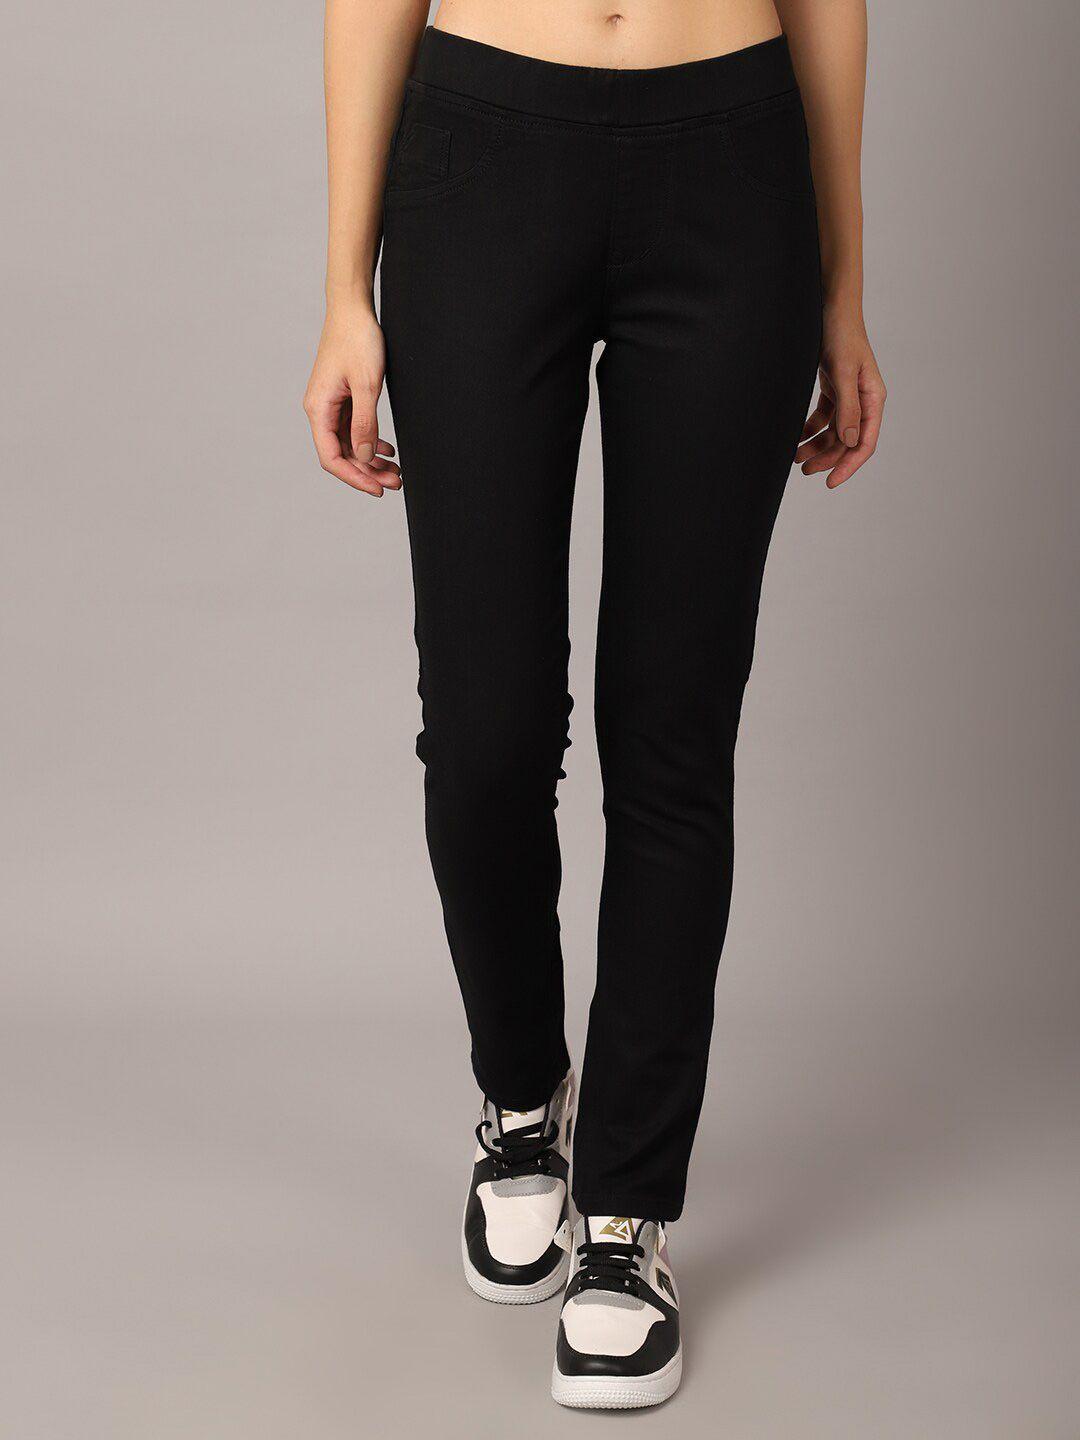 crozo by cantabil women black solid jeggings